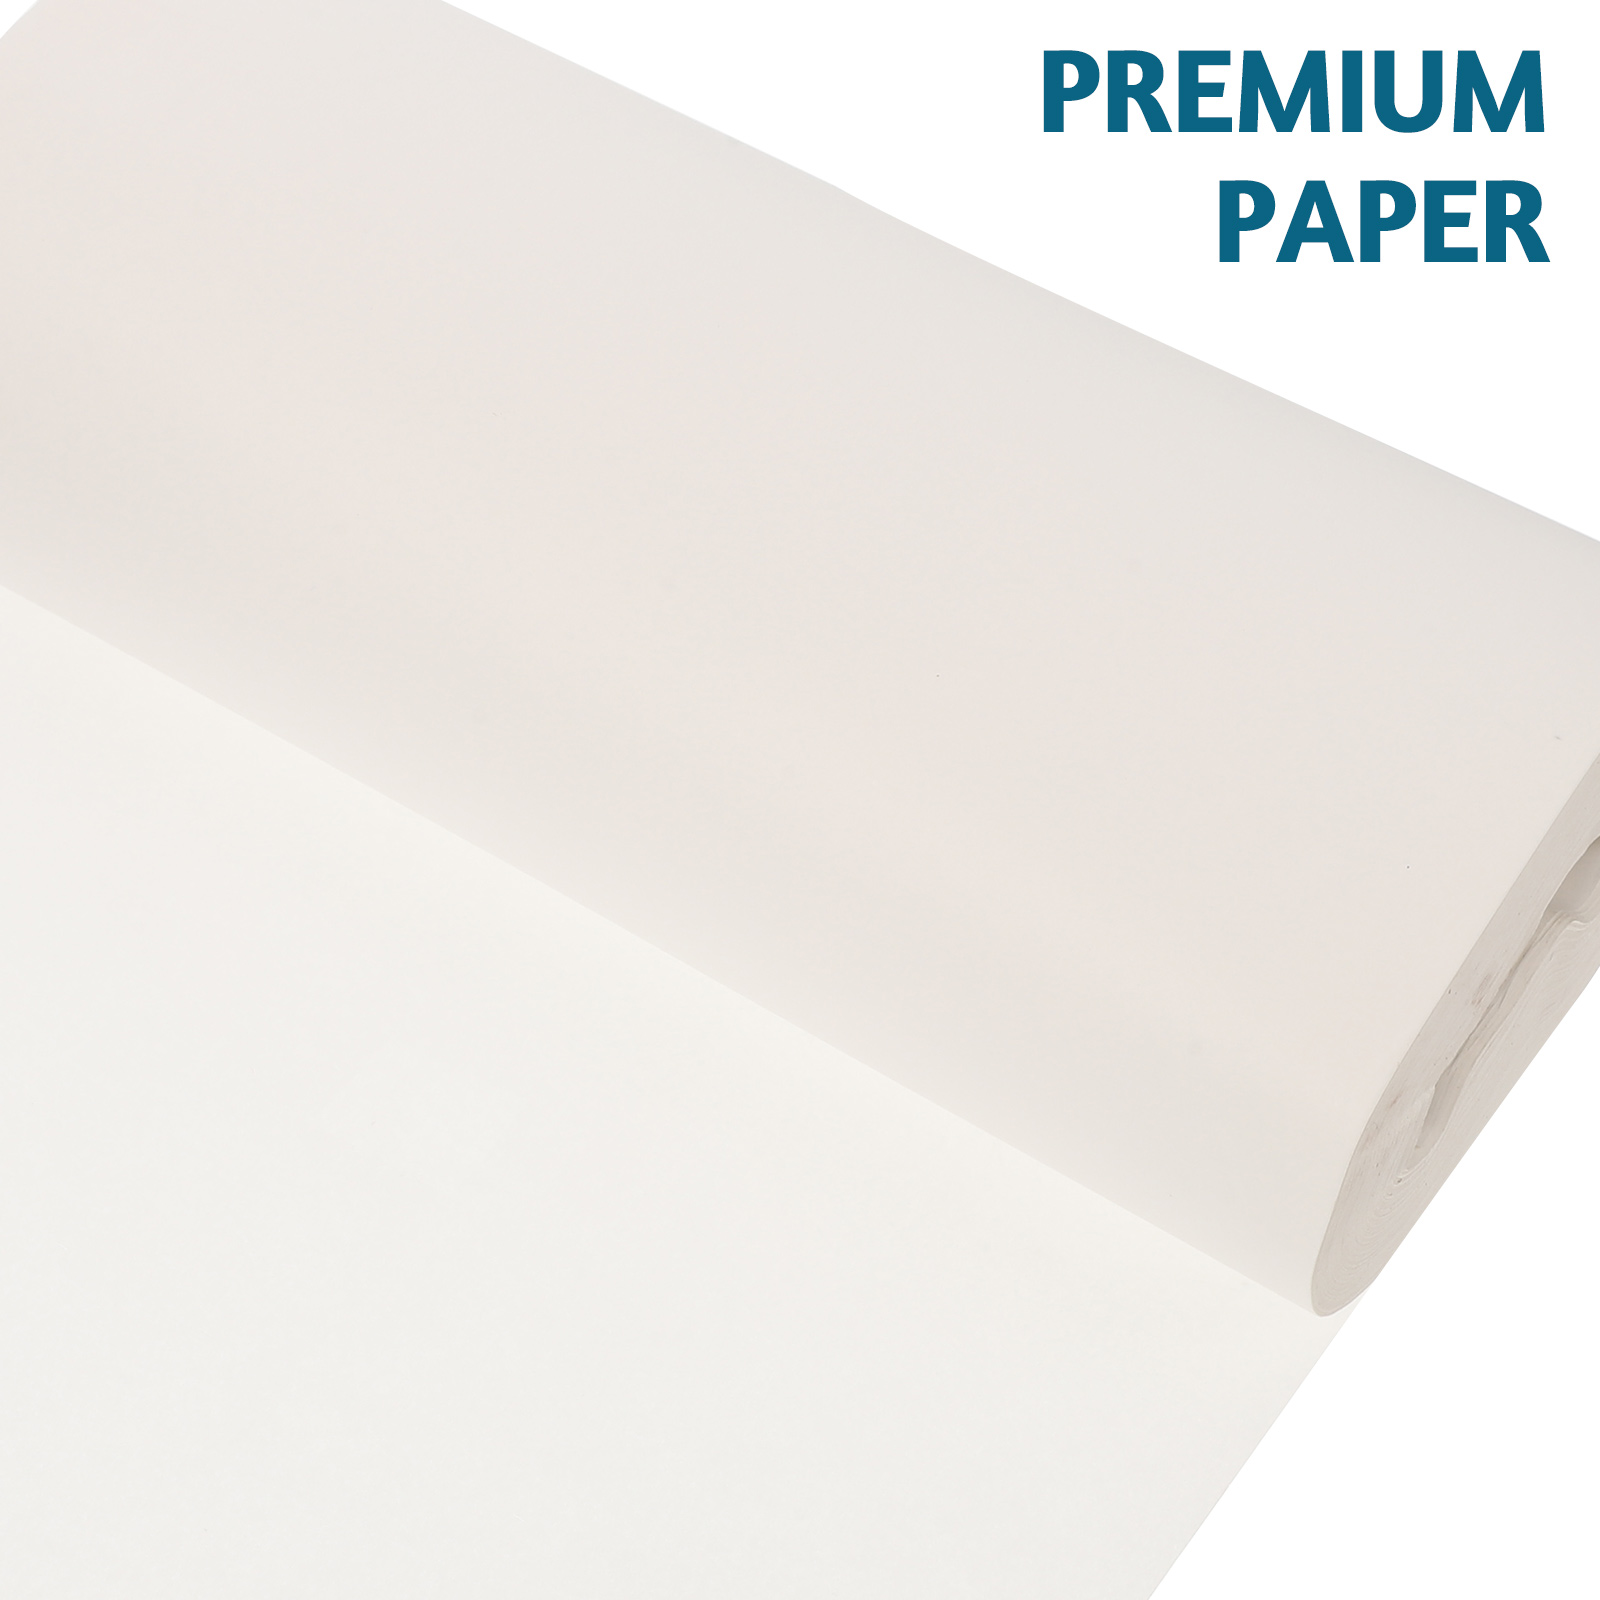 Homemaxs 1 Roll of Gift Wrapping Roll Papers Solid White Roll Paper for DIY Arts Clothes, Size: 5000.00x18x0.10cm